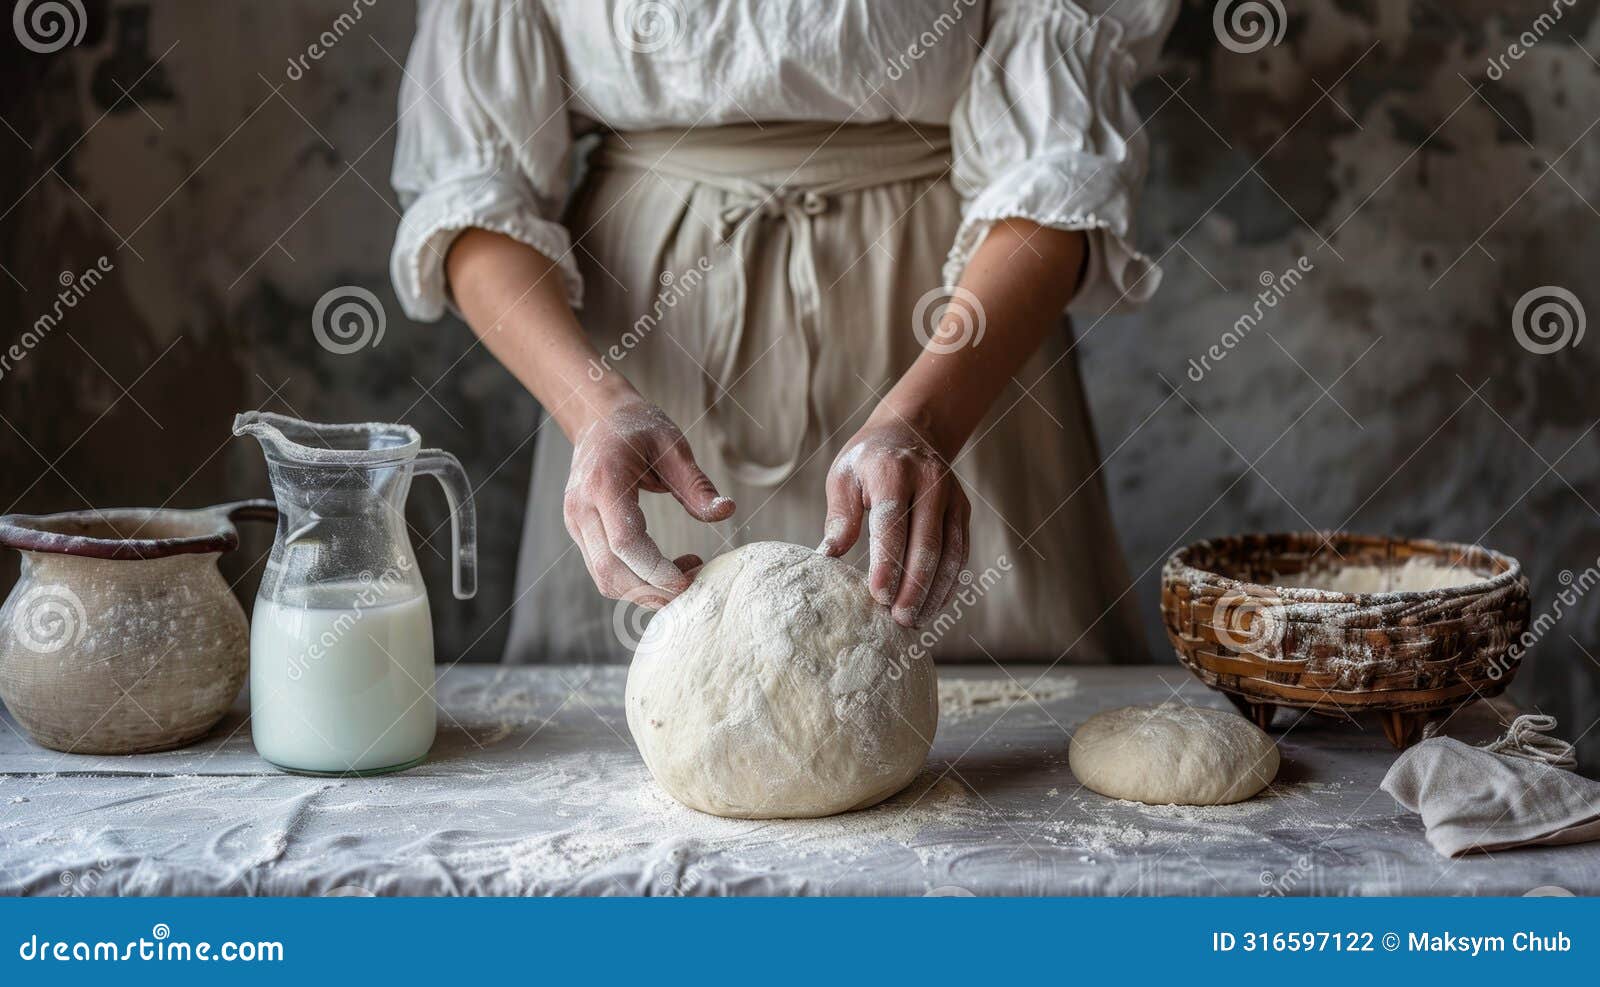 homemade dough preparation in warmly lit kitchen with flour, milk, and caring hands